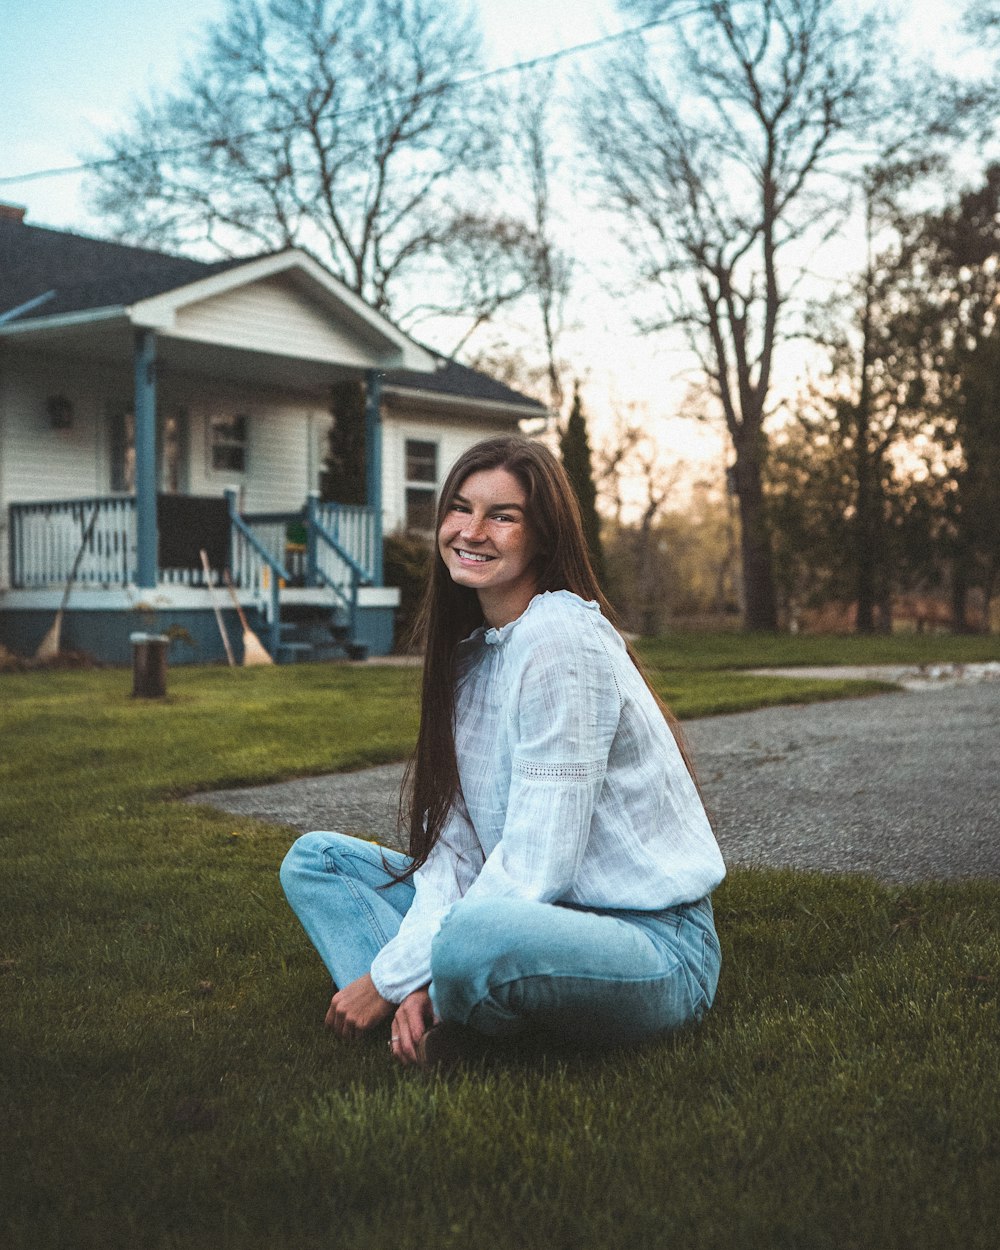 woman in white long sleeve shirt and blue denim jeans sitting on green grass field during